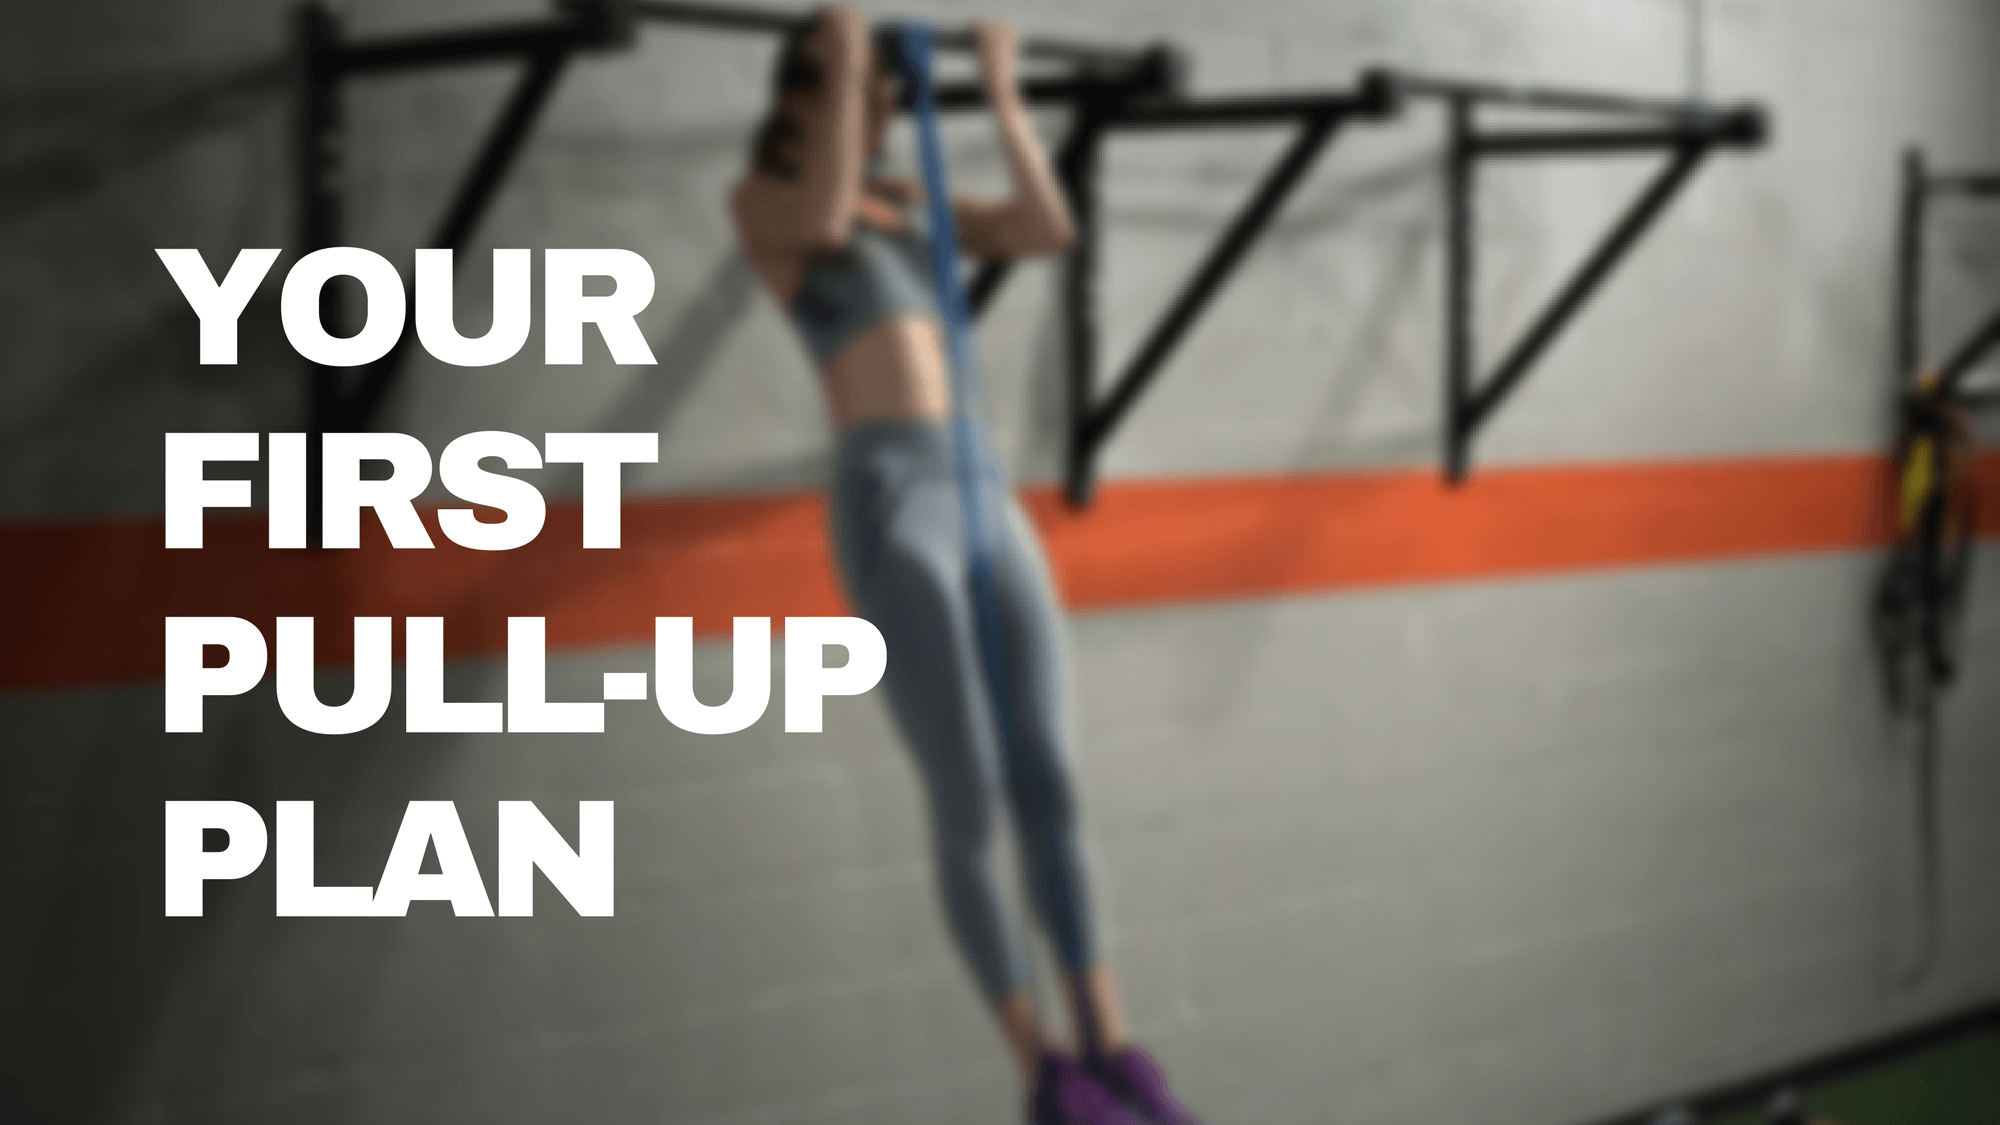 Better Way to Build Unassisted Pull-up Strength